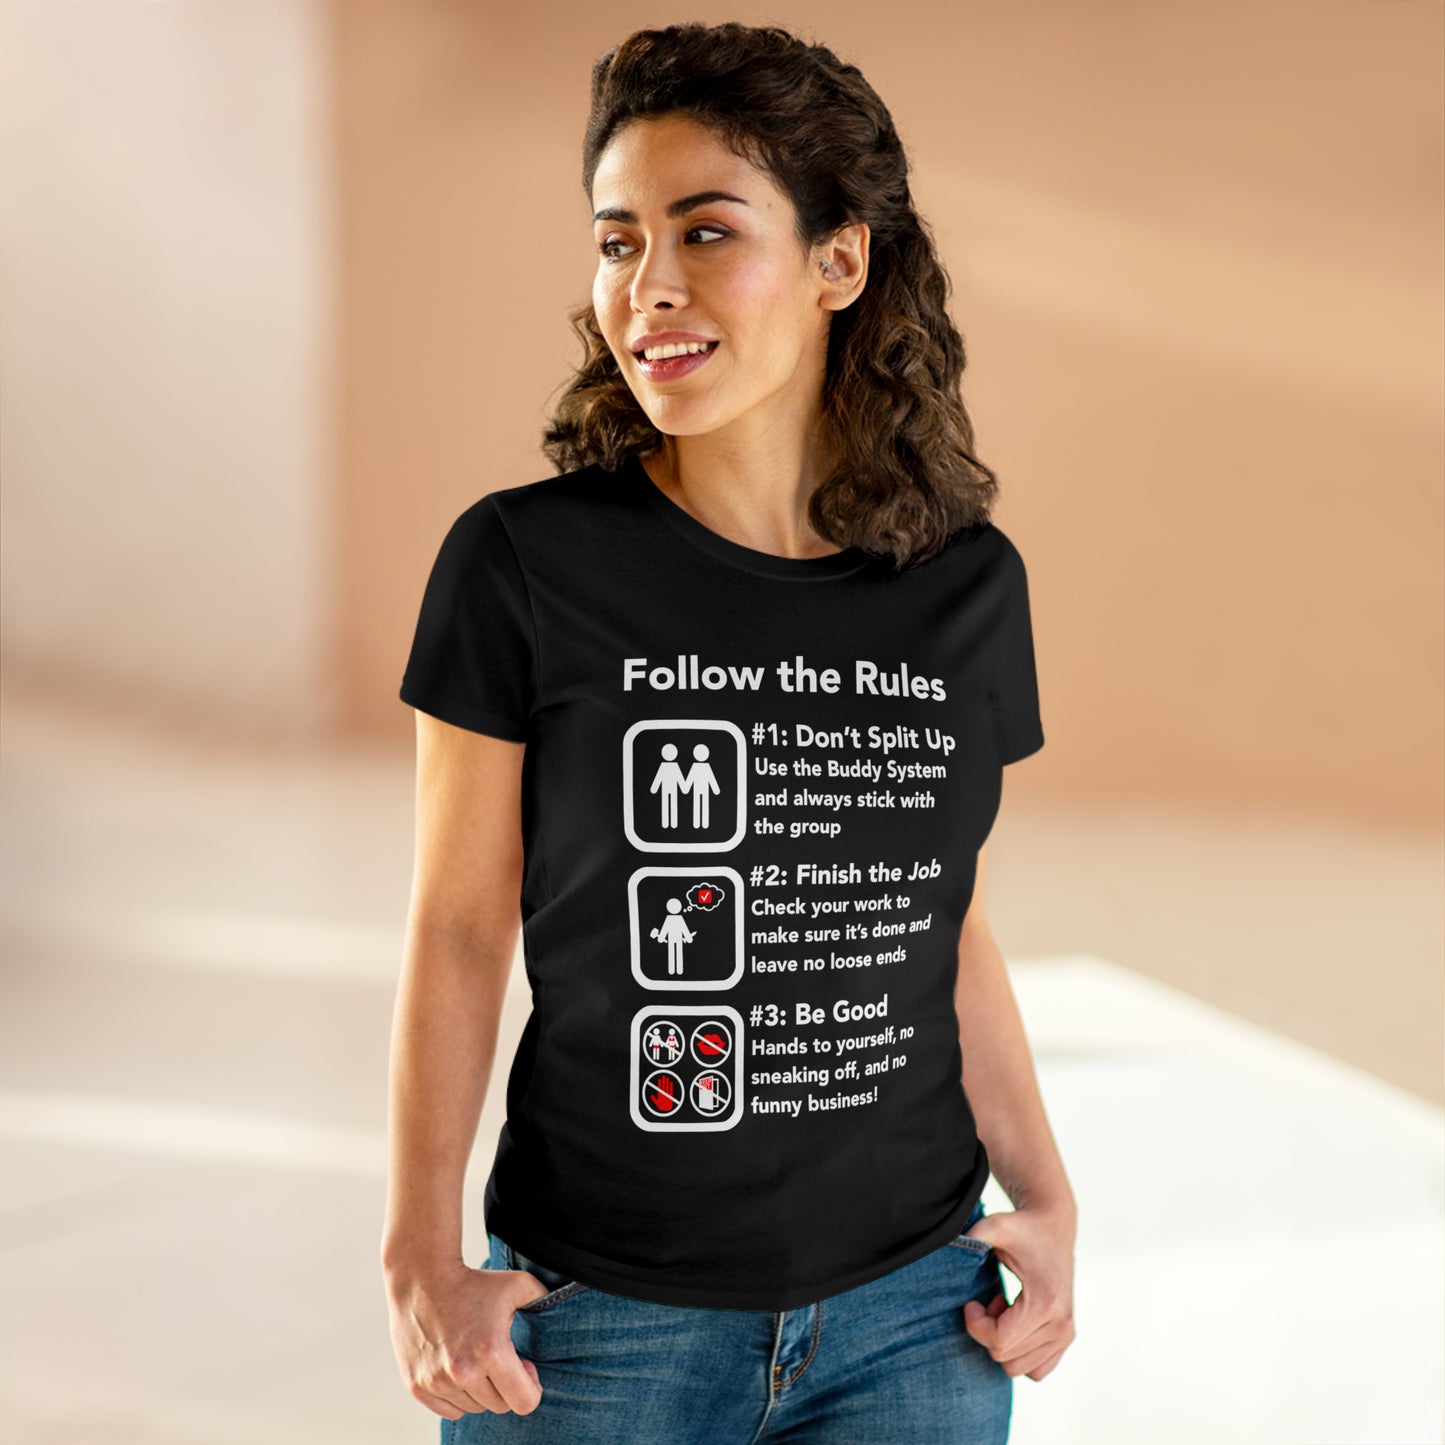 The Rules Women’s Tee